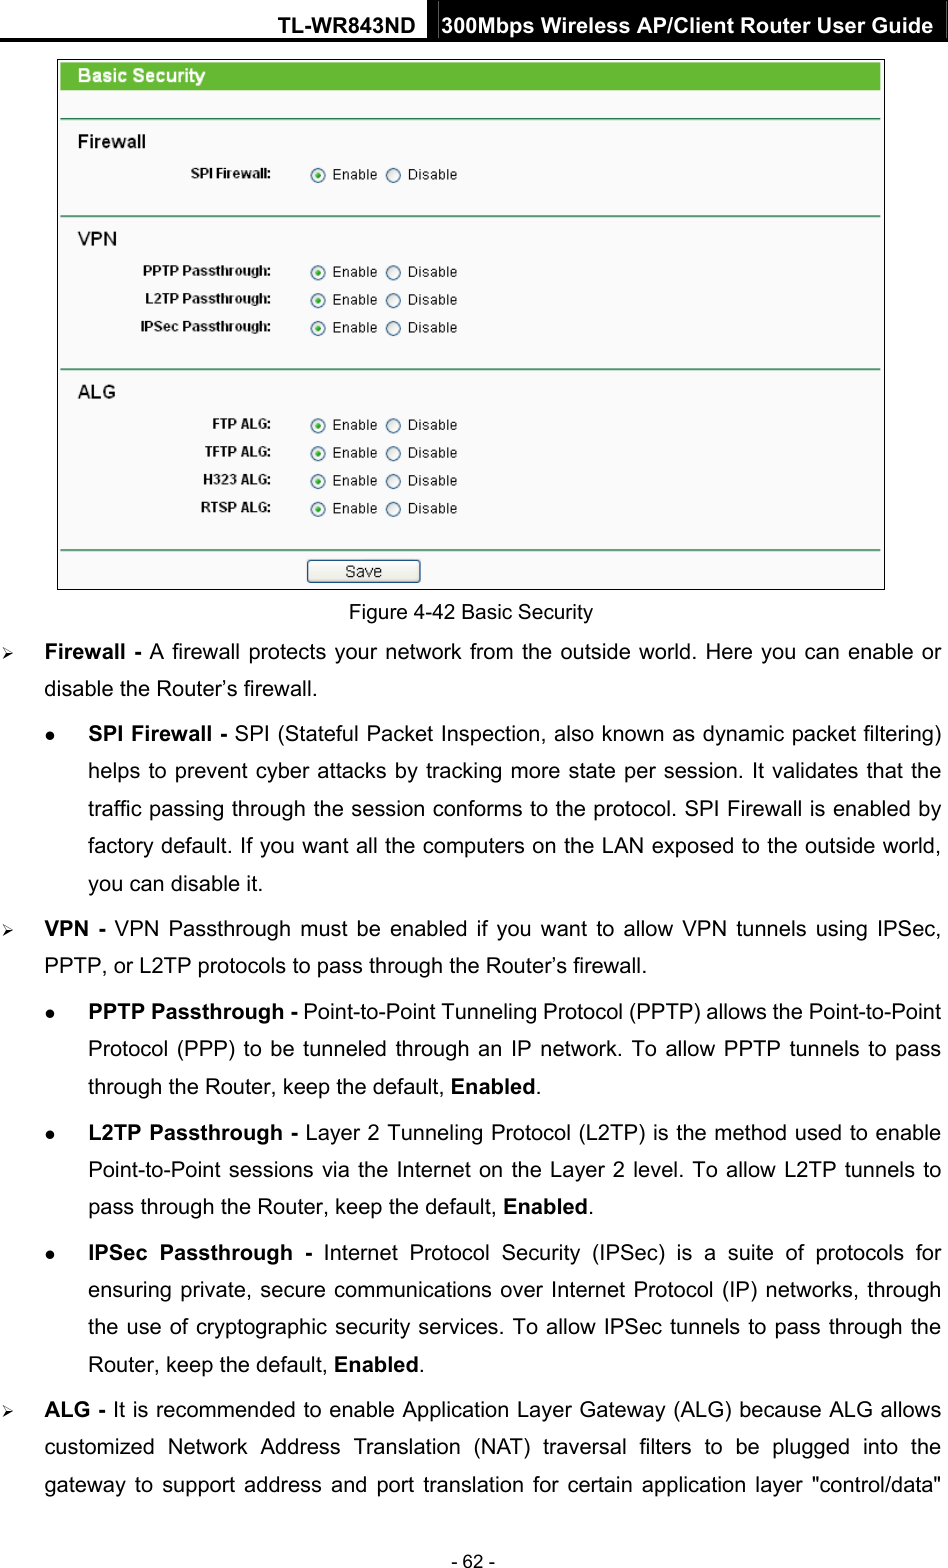 TL-WR843ND 300Mbps Wireless AP/Client Router User Guide - 62 -  Figure 4-42 Basic Security  Firewall - A firewall protects your network from the outside world. Here you can enable or disable the Router’s firewall.  SPI Firewall - SPI (Stateful Packet Inspection, also known as dynamic packet filtering) helps to prevent cyber attacks by tracking more state per session. It validates that the traffic passing through the session conforms to the protocol. SPI Firewall is enabled by factory default. If you want all the computers on the LAN exposed to the outside world, you can disable it.    VPN - VPN Passthrough must be enabled if you want to allow VPN tunnels using IPSec, PPTP, or L2TP protocols to pass through the Router’s firewall.  PPTP Passthrough - Point-to-Point Tunneling Protocol (PPTP) allows the Point-to-Point Protocol (PPP) to be tunneled through an IP network. To allow PPTP tunnels to pass through the Router, keep the default, Enabled.   L2TP Passthrough - Layer 2 Tunneling Protocol (L2TP) is the method used to enable Point-to-Point sessions via the Internet on the Layer 2 level. To allow L2TP tunnels to pass through the Router, keep the default, Enabled.  IPSec Passthrough - Internet Protocol Security (IPSec) is a suite of protocols for ensuring private, secure communications over Internet Protocol (IP) networks, through the use of cryptographic security services. To allow IPSec tunnels to pass through the Router, keep the default, Enabled.  ALG - It is recommended to enable Application Layer Gateway (ALG) because ALG allows customized Network Address Translation (NAT) traversal filters to be plugged into the gateway to support address and port translation for certain application layer &quot;control/data&quot; 